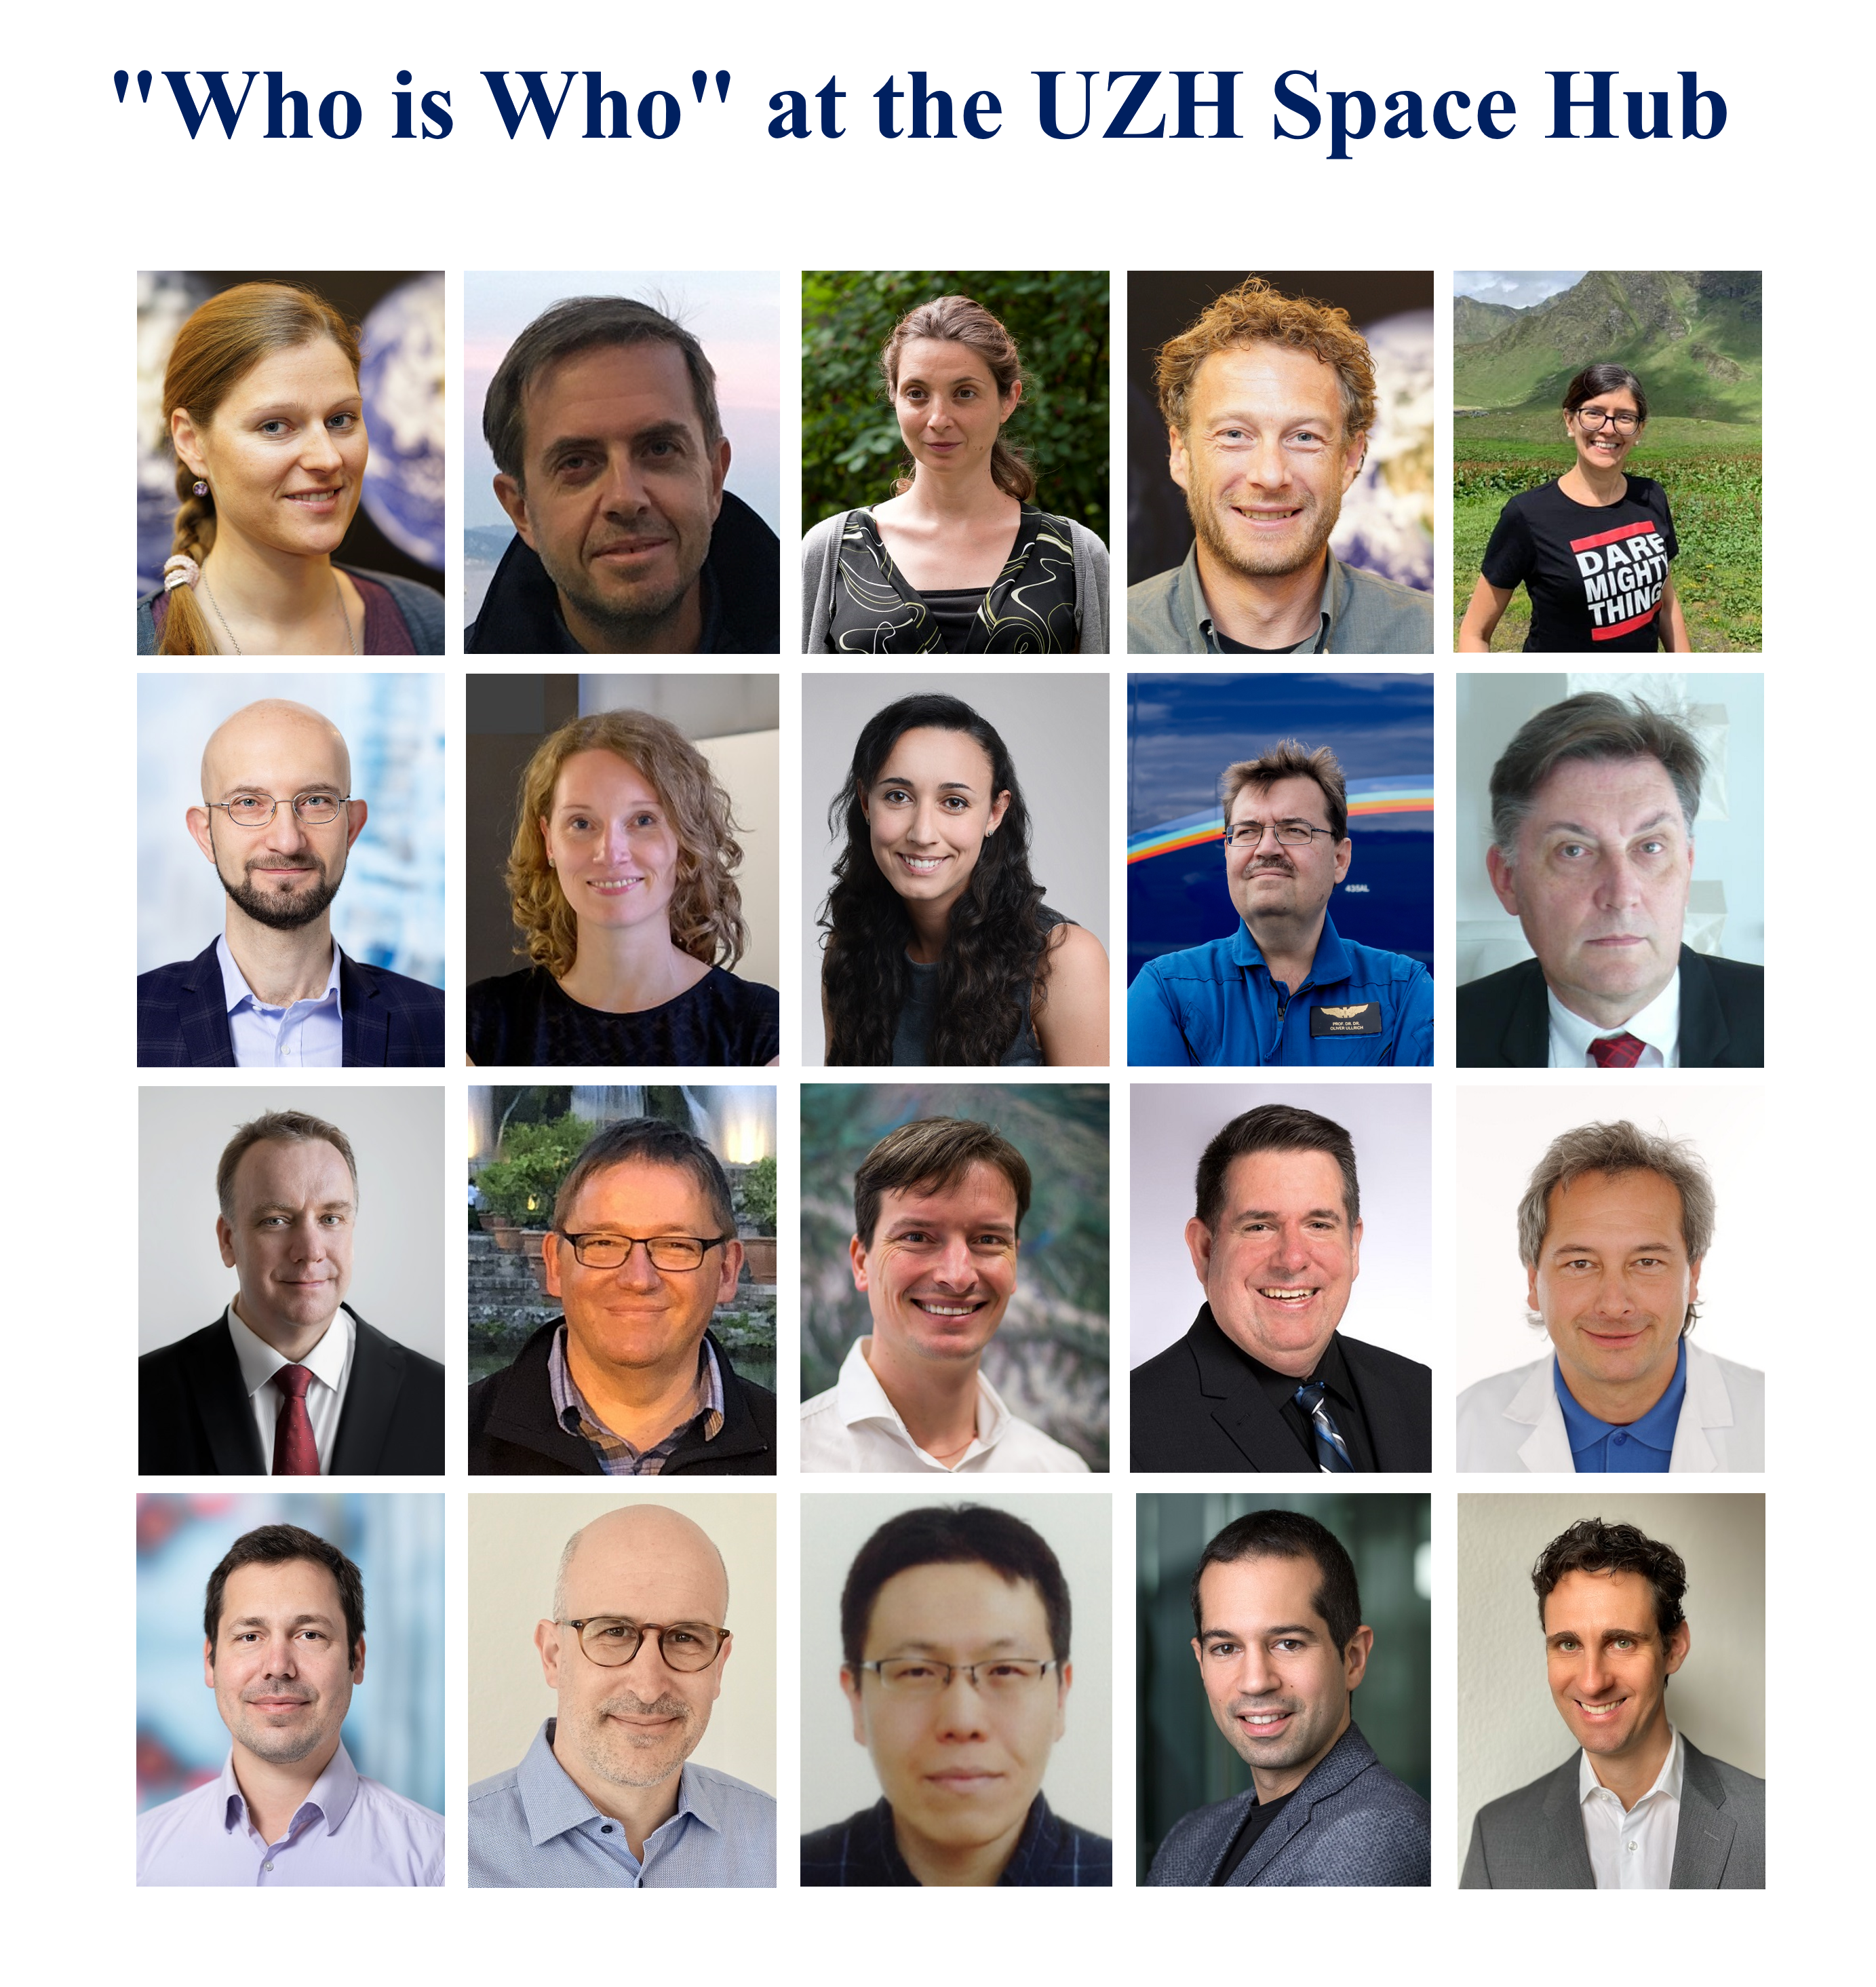  "Who is Who" in the UZH Space Hub